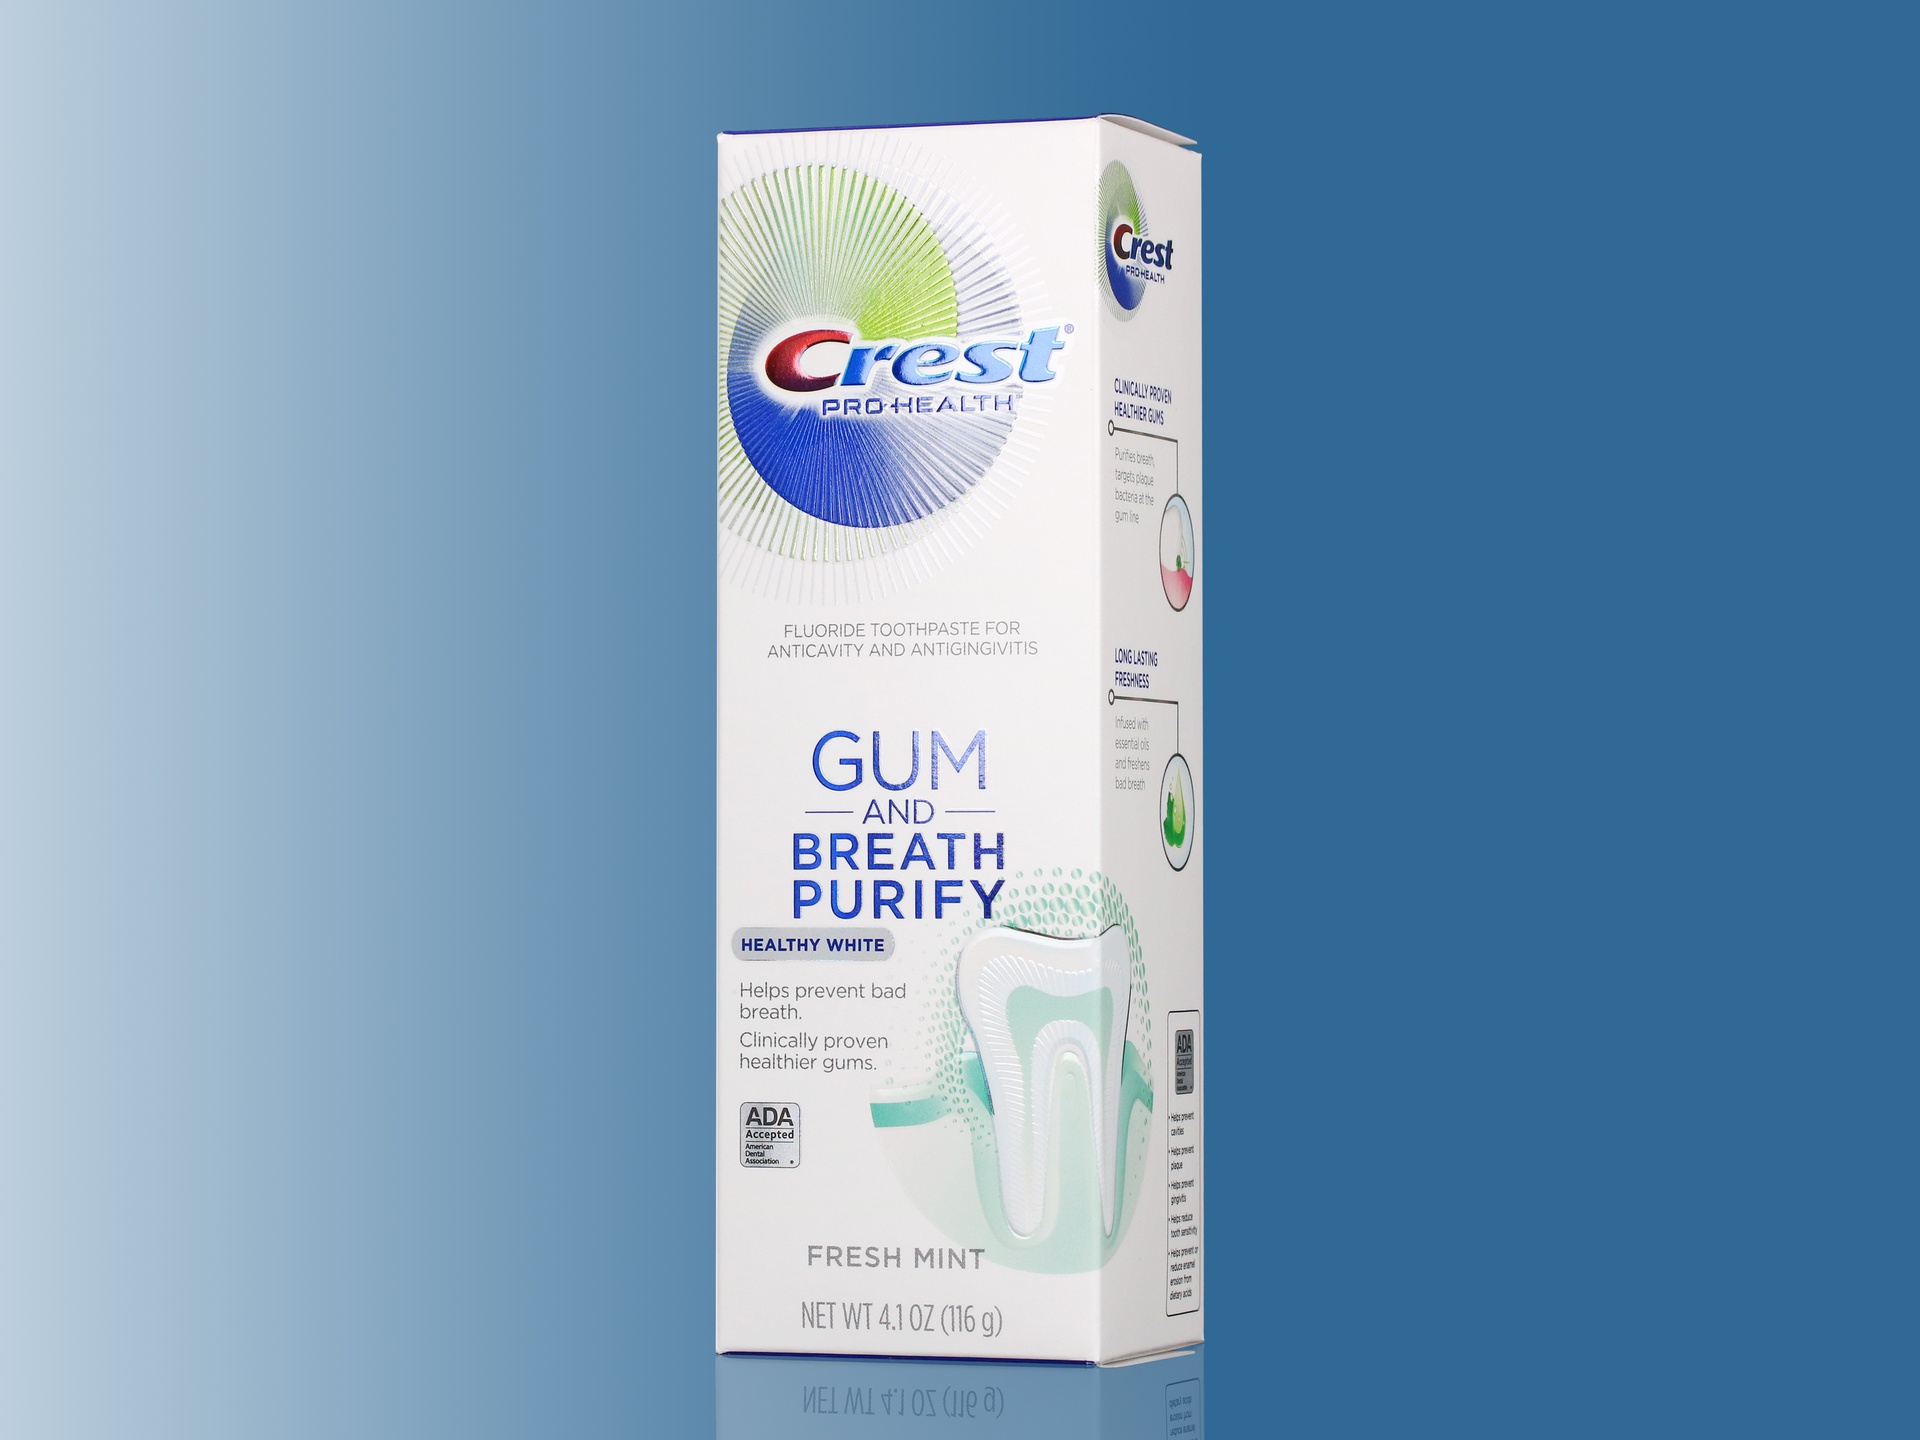 Crest Pro Health Gum and Breath Purify Healthy White packaging